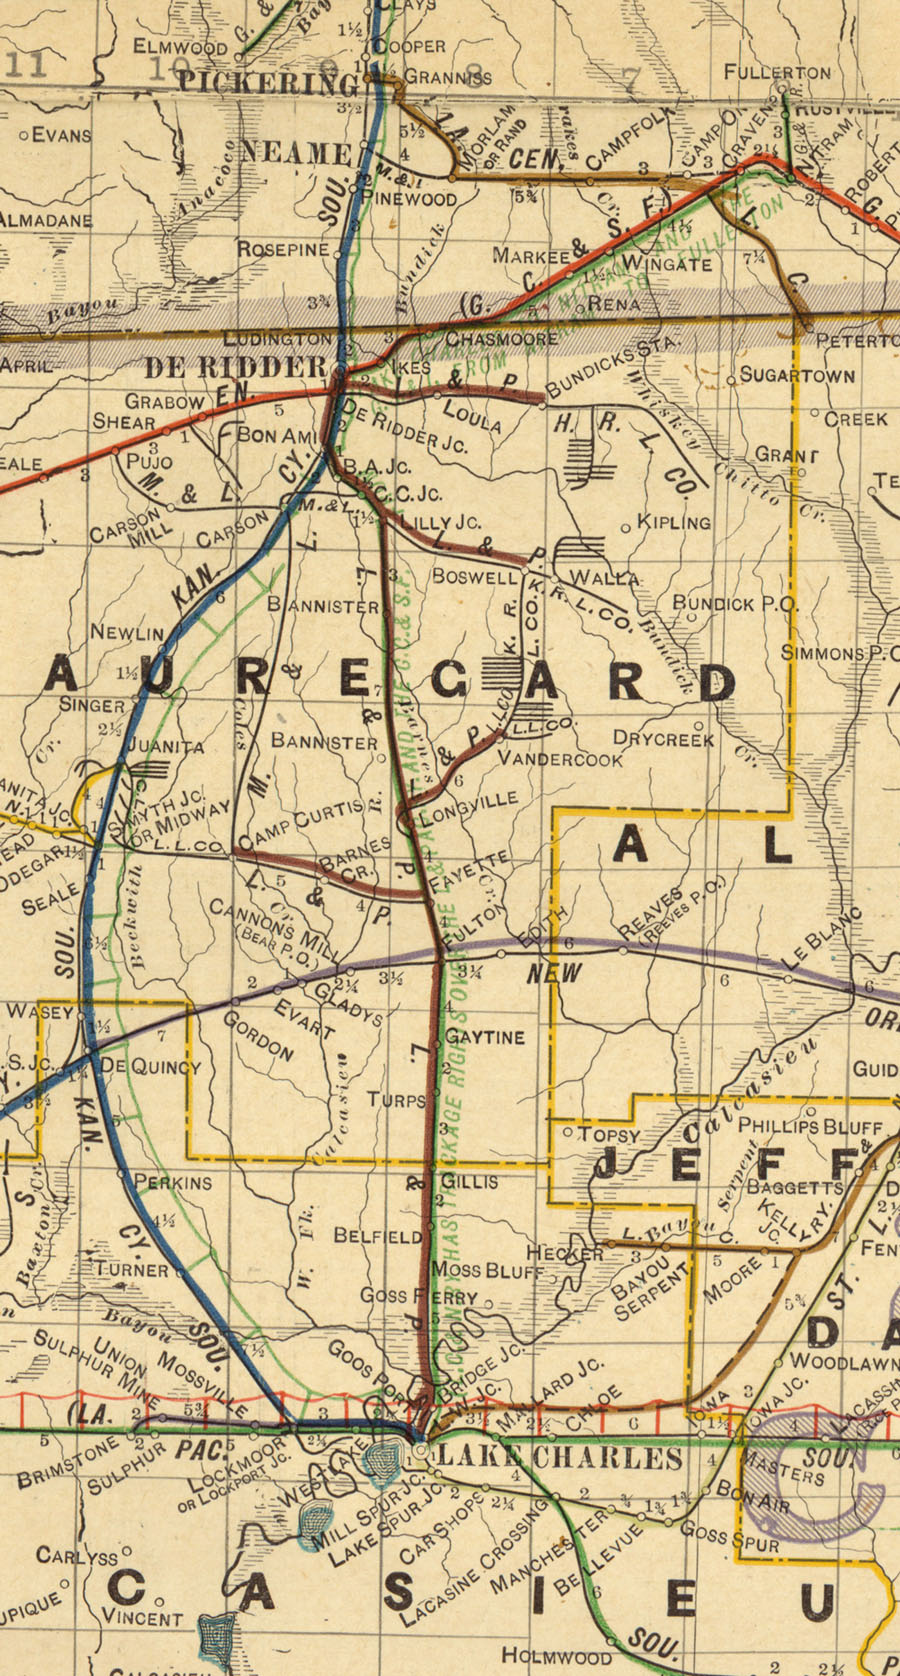 Lake Charles & Northern Railroad Company (La.), Map Showing Route in 1913.